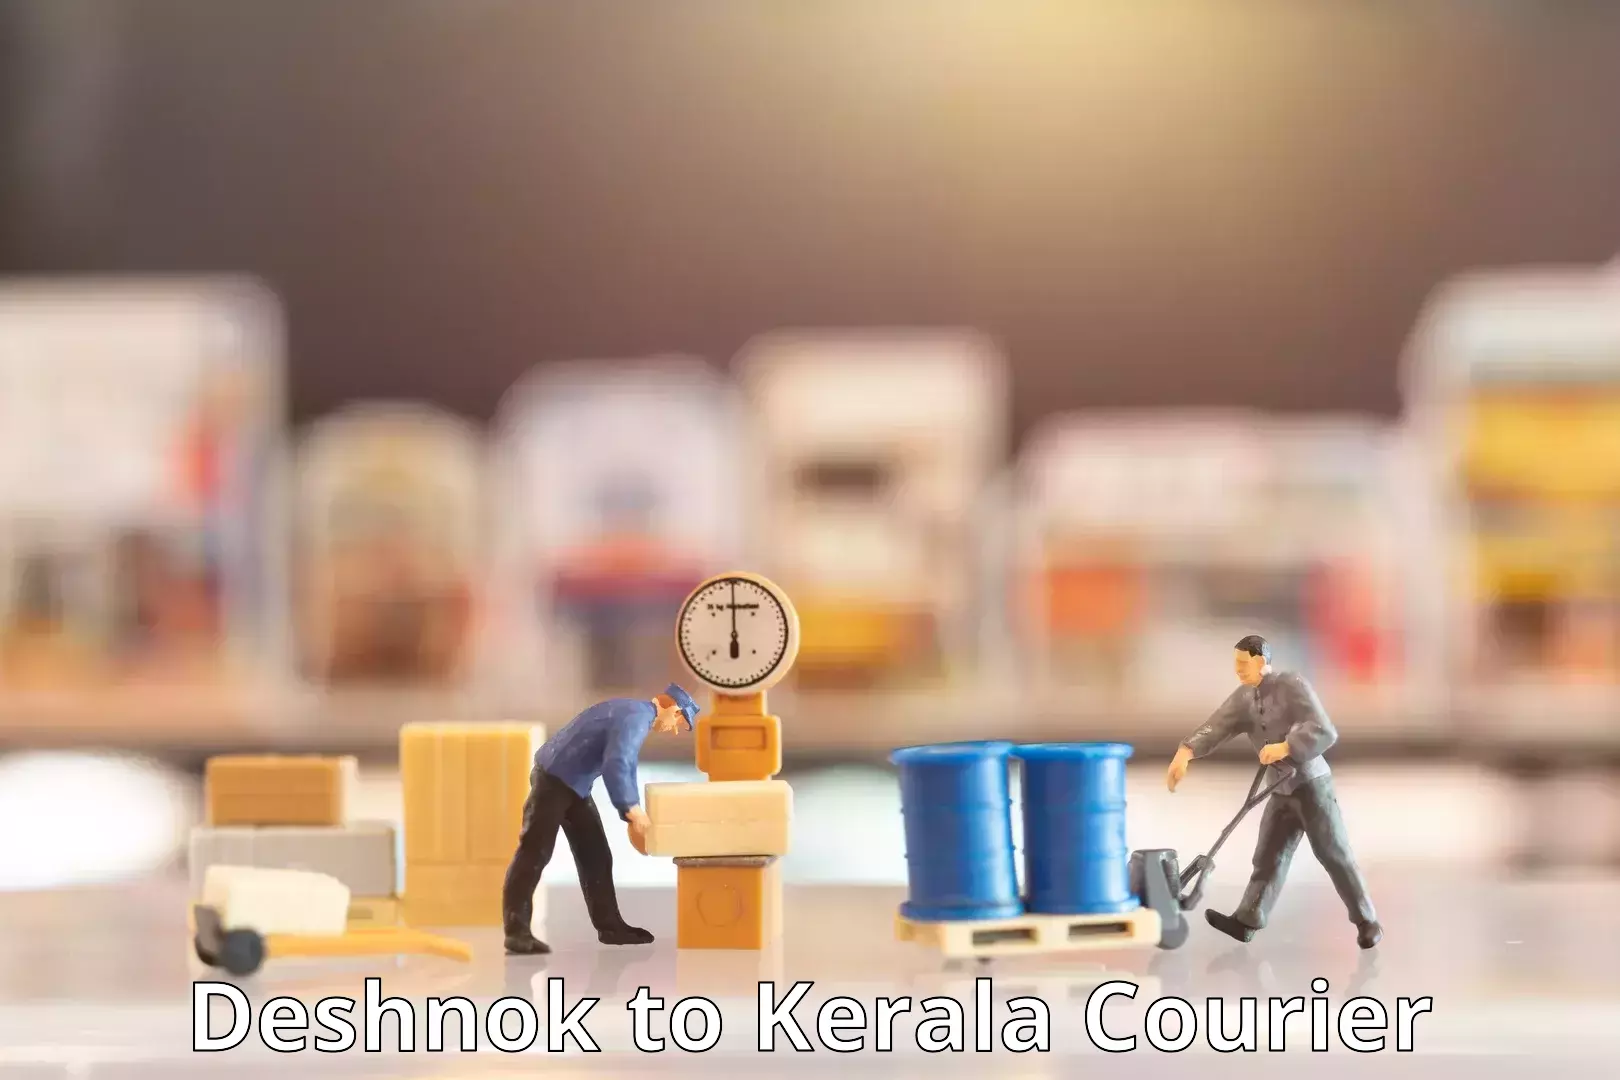 Efficient parcel service Deshnok to Cochin University of Science and Technology